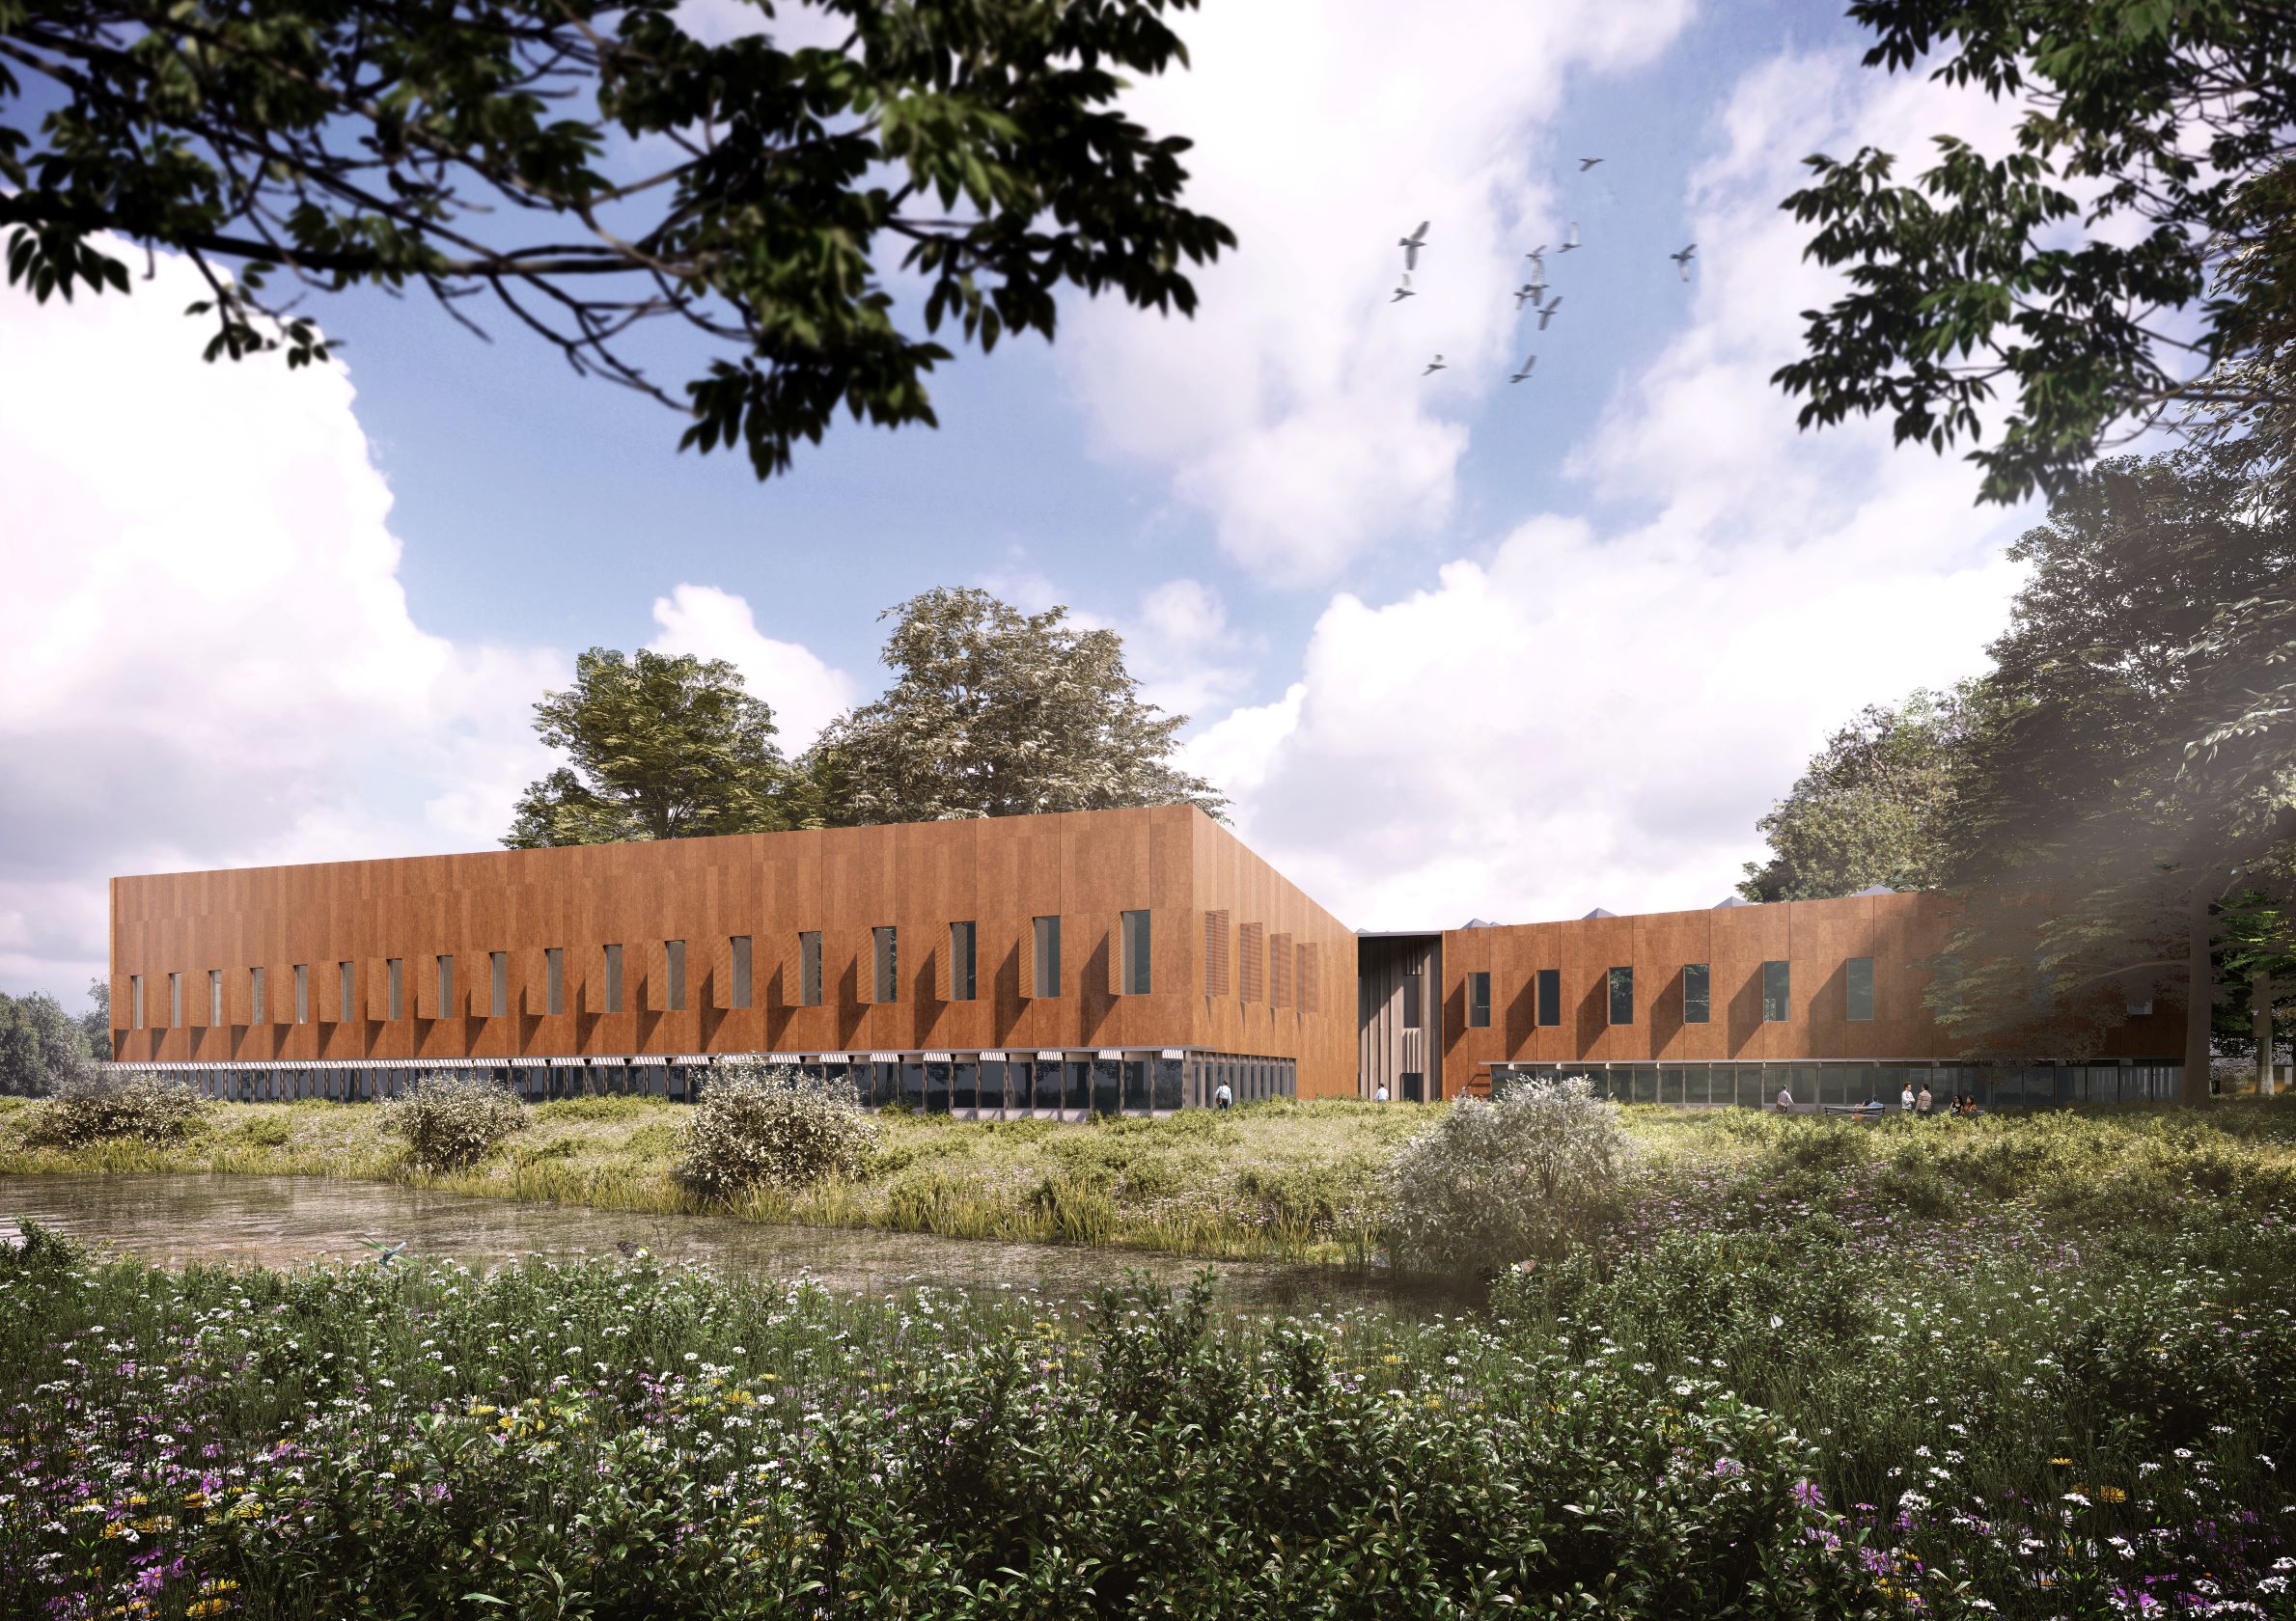 New 32,000 sq ft Hybrid Sci-Tech Building Being Developed at Harwell Campus @HarwellCampus